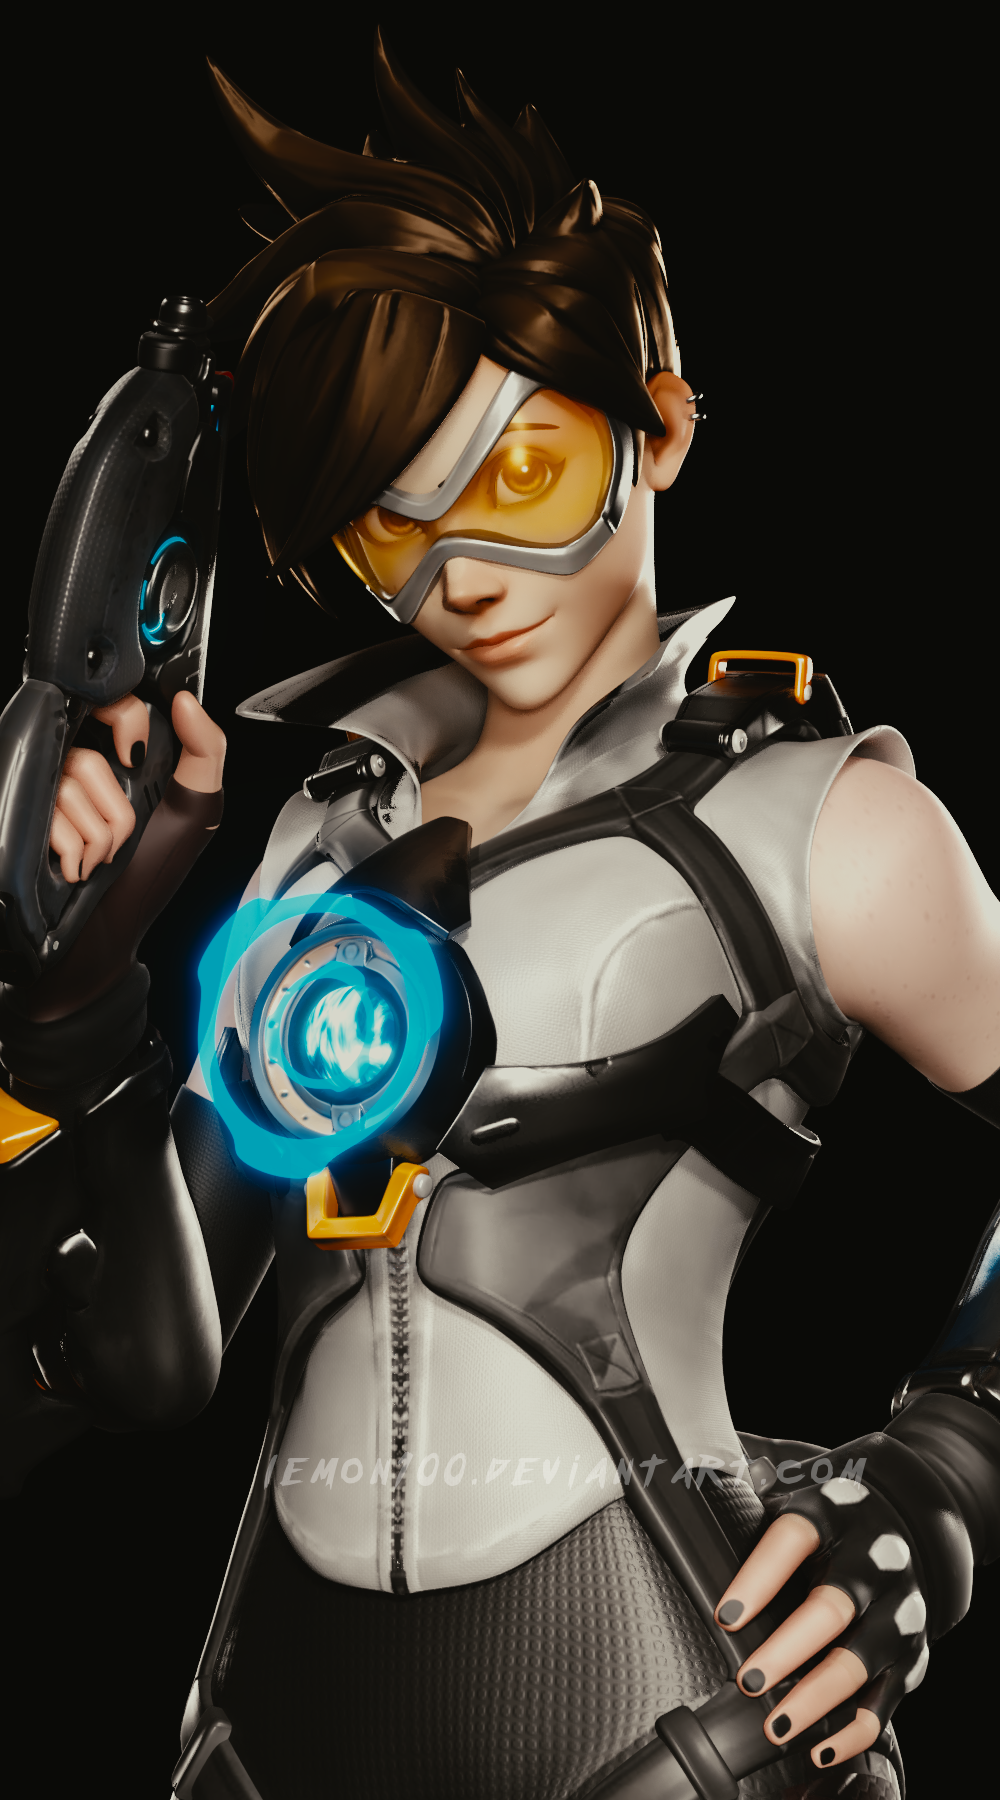 Overwatch Infographic - Lena 'Tracer' Oxton by Asainguy444 on DeviantArt